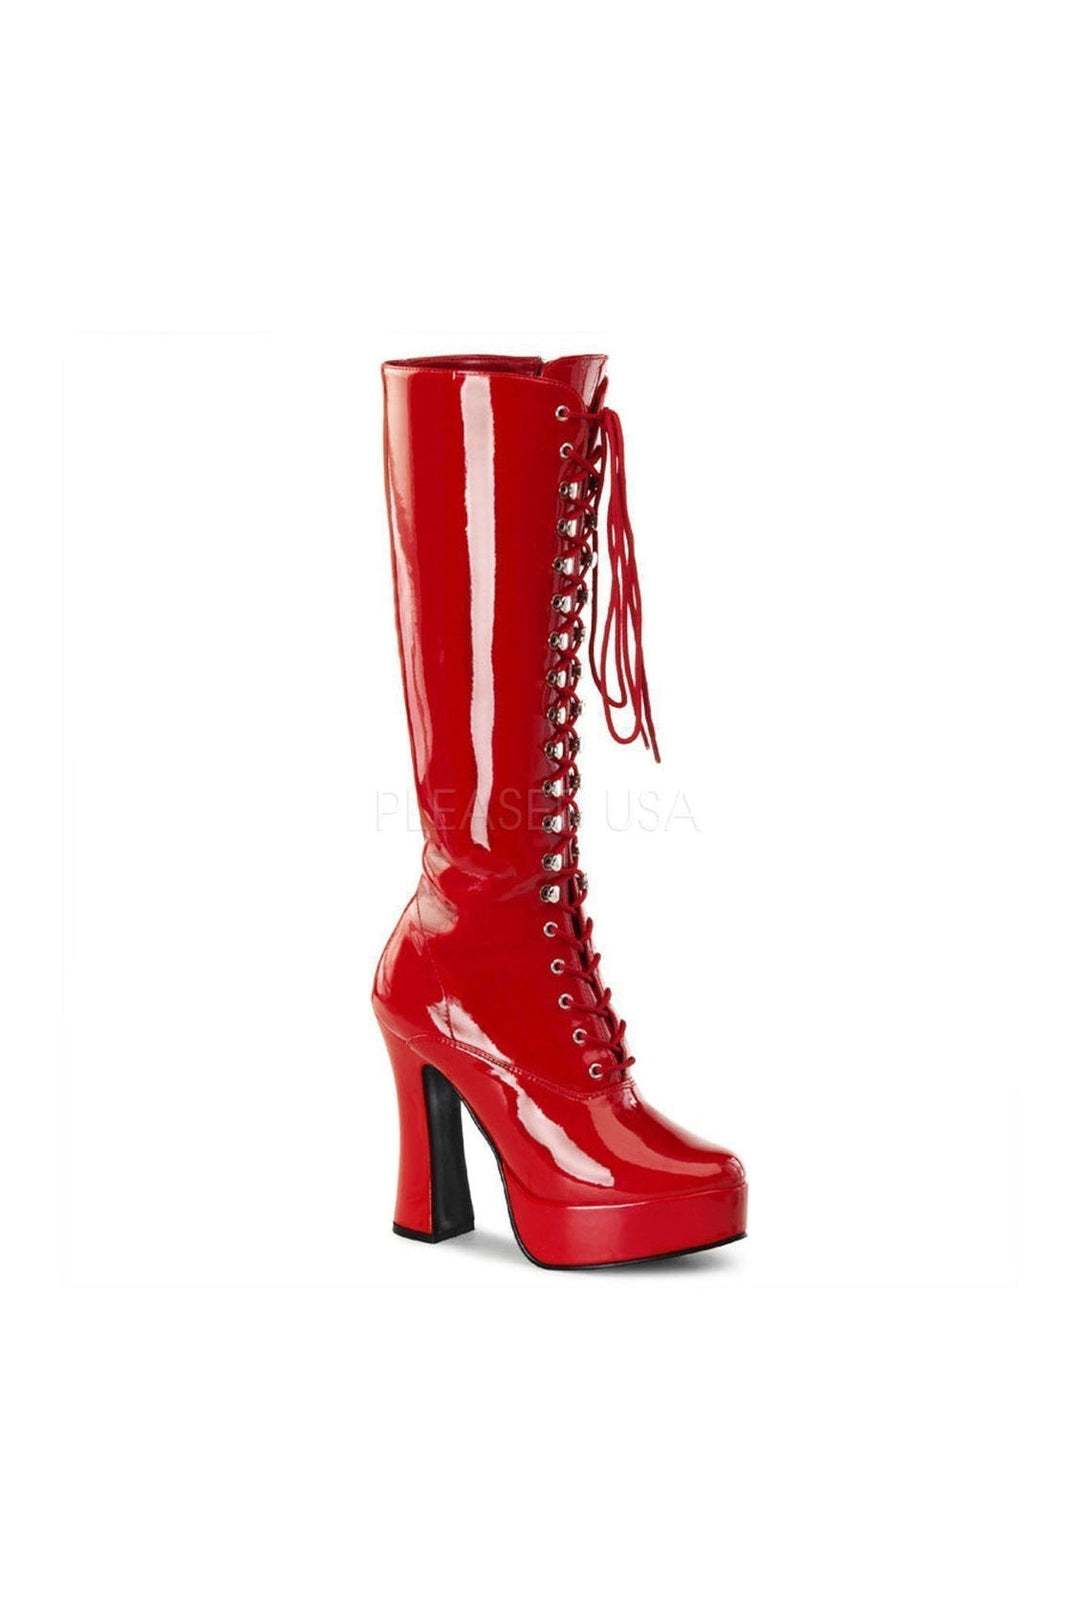 Pleaser Red Knee Boots Platform Stripper Shoes | Buy at Sexyshoes.com